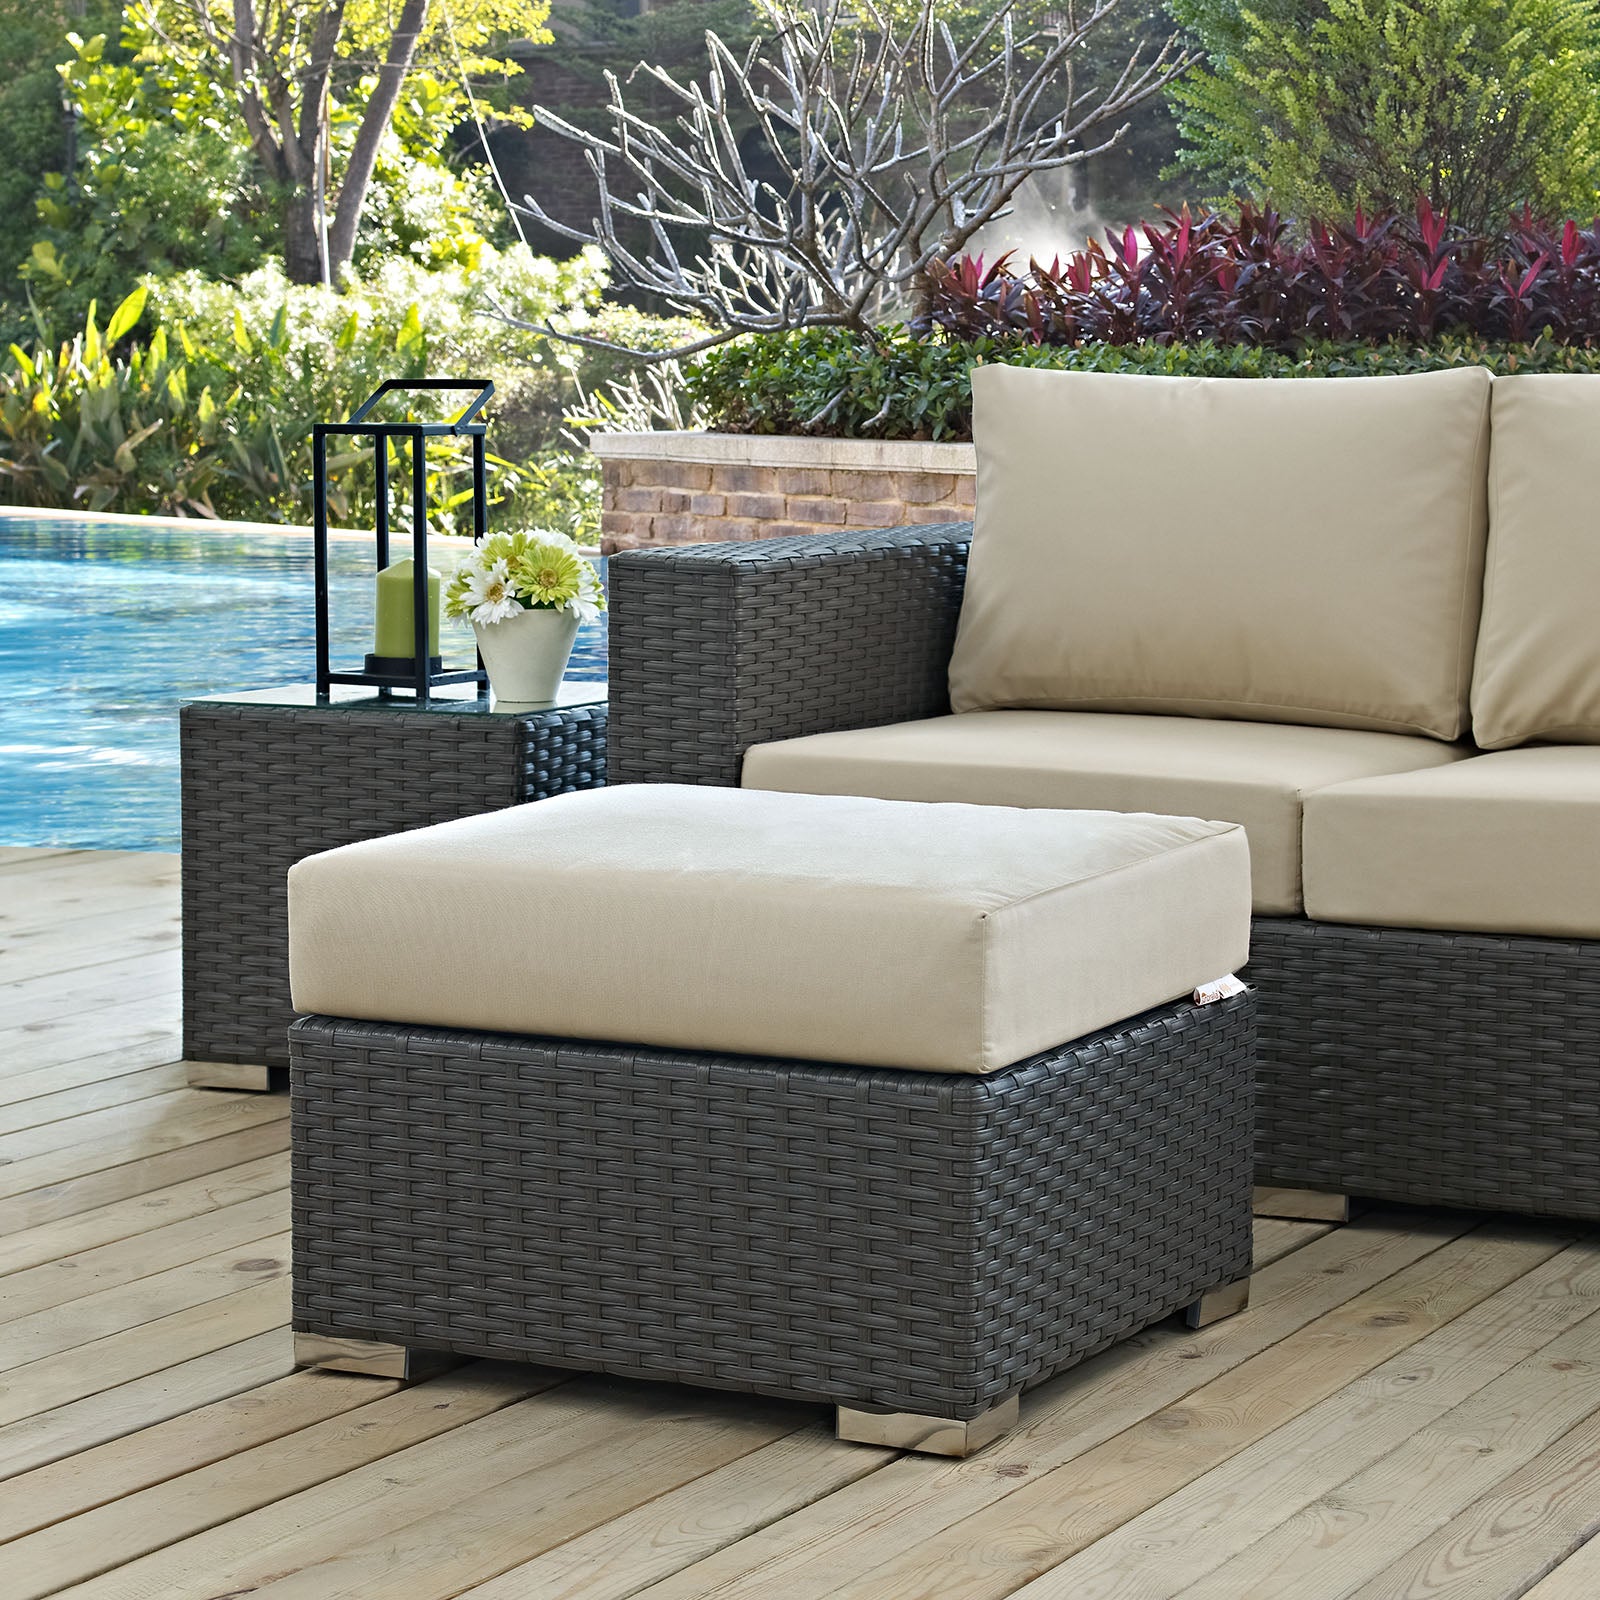 Modway Outdoor Stools & Benches - Sojourn Outdoor Patio Sunbrella Ottoman Canvas Antique Beige